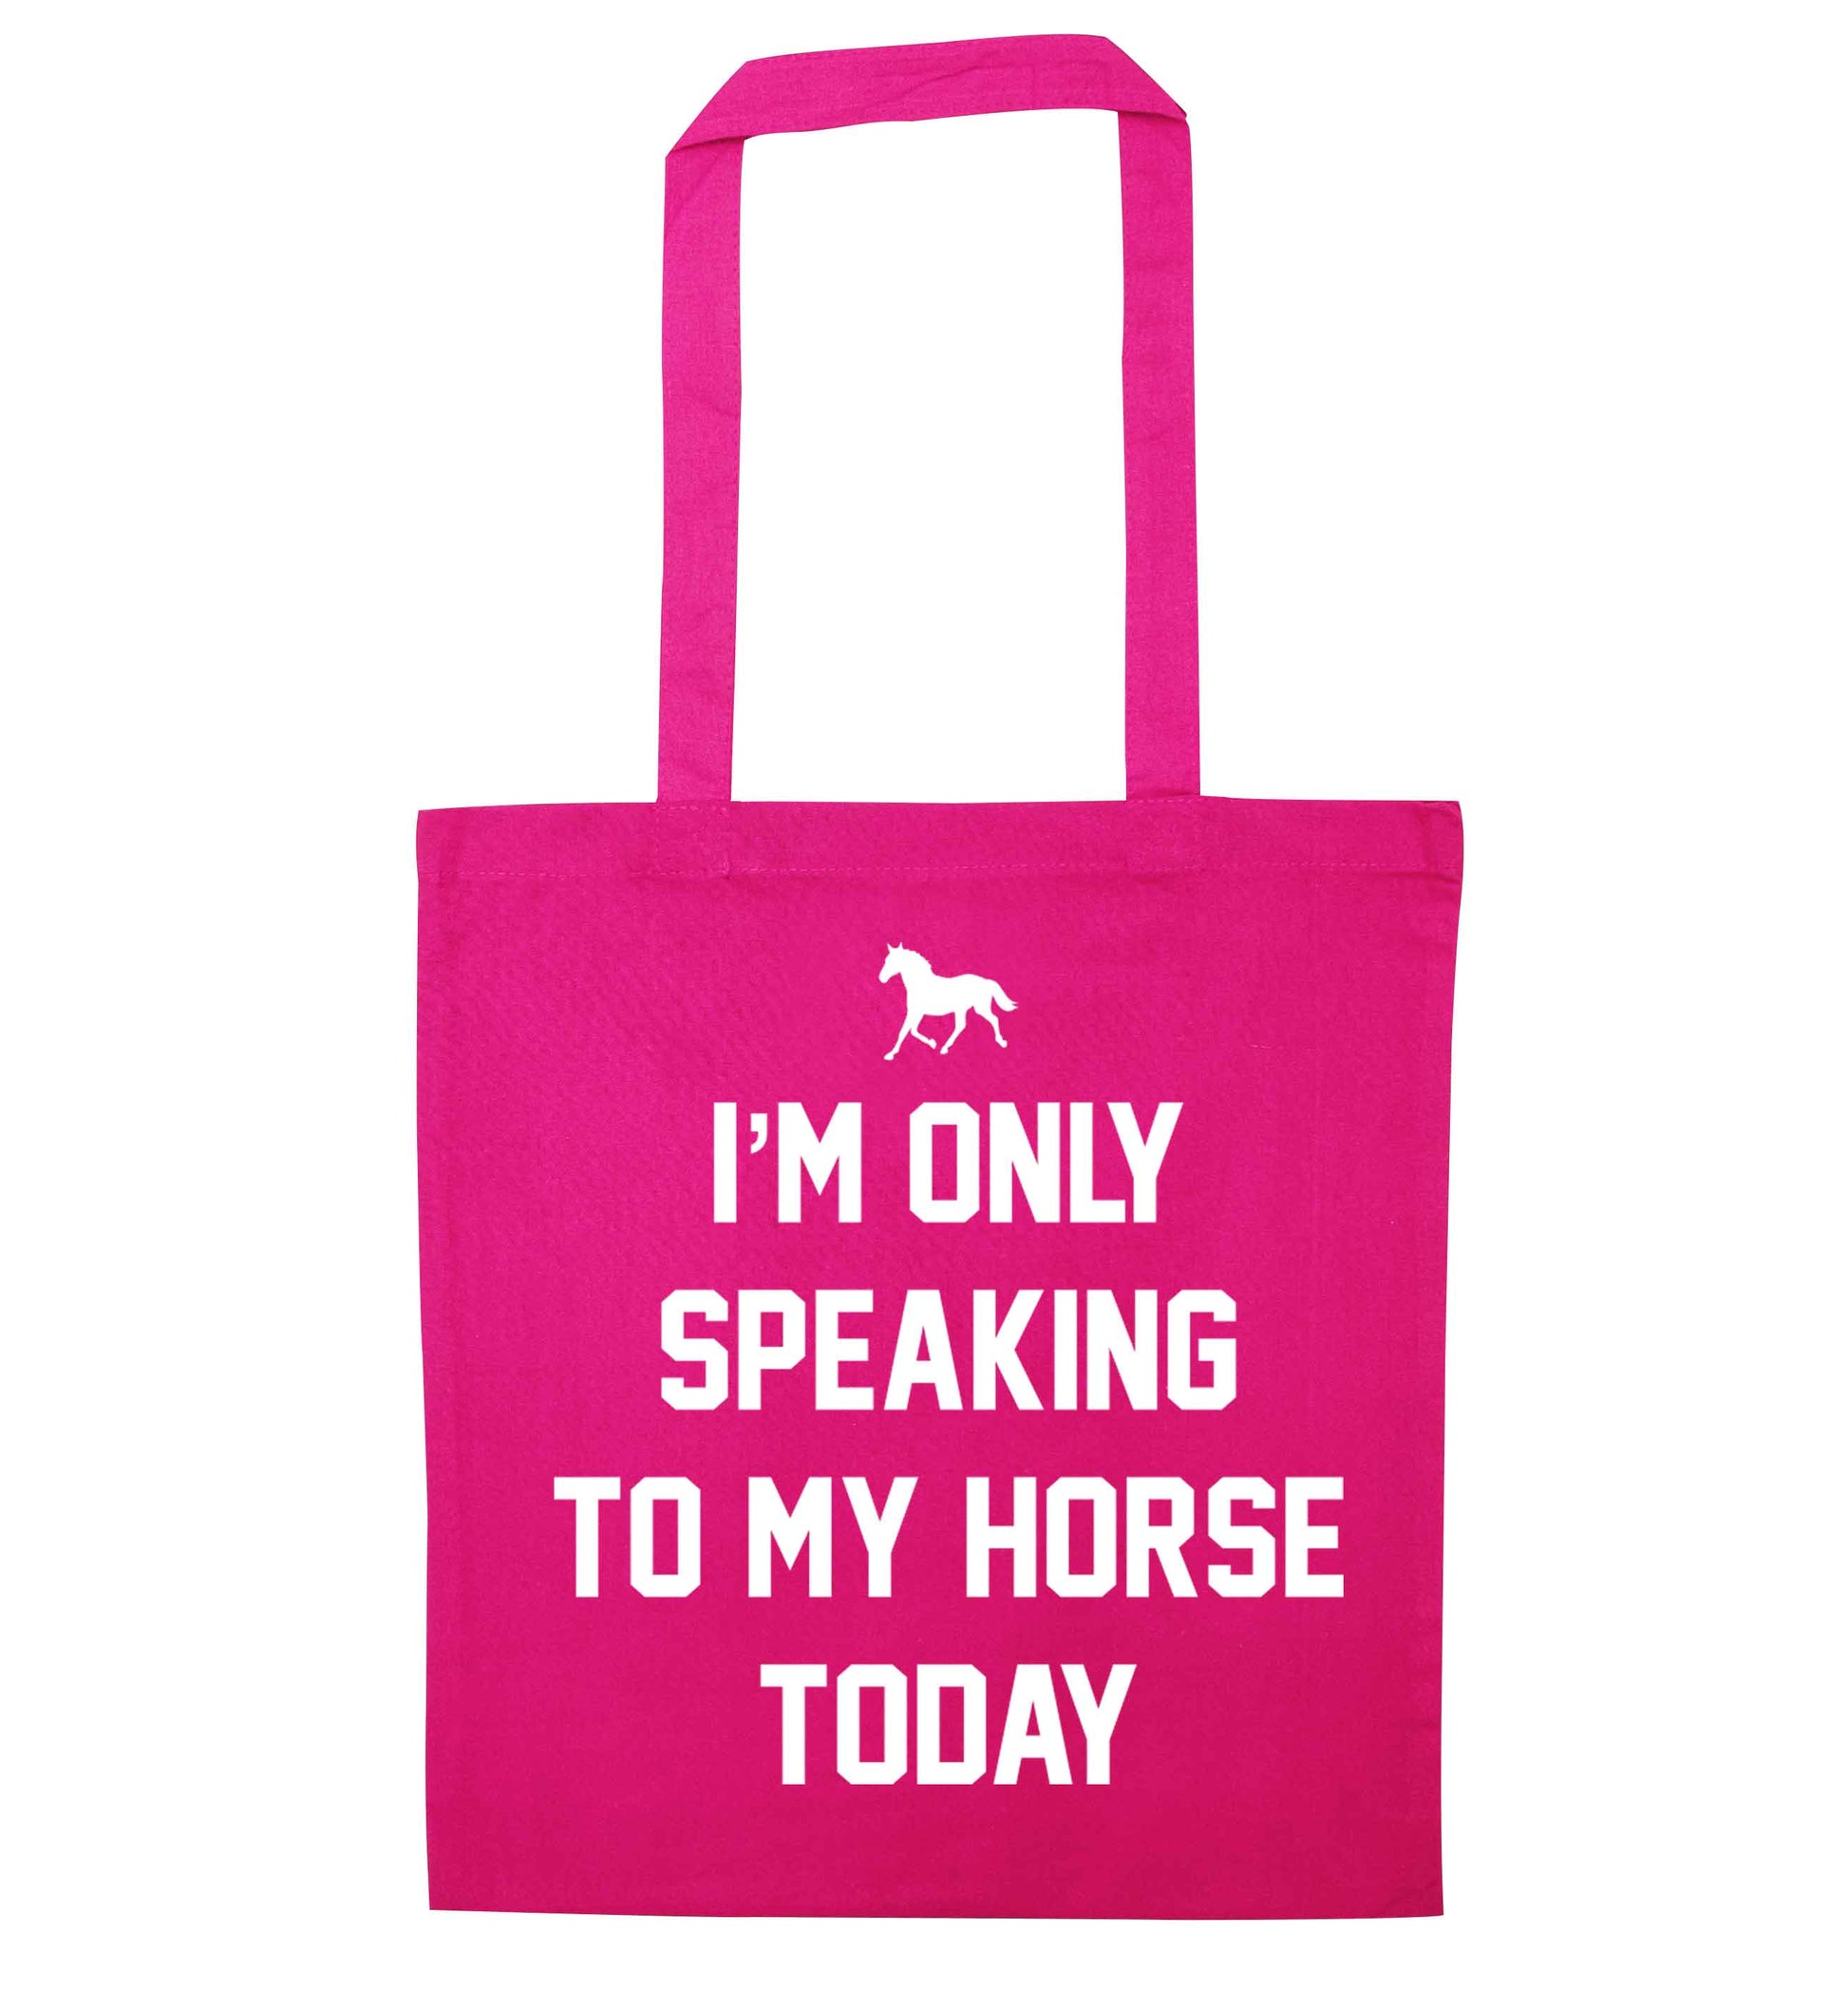 I'm only speaking to my horse today pink tote bag